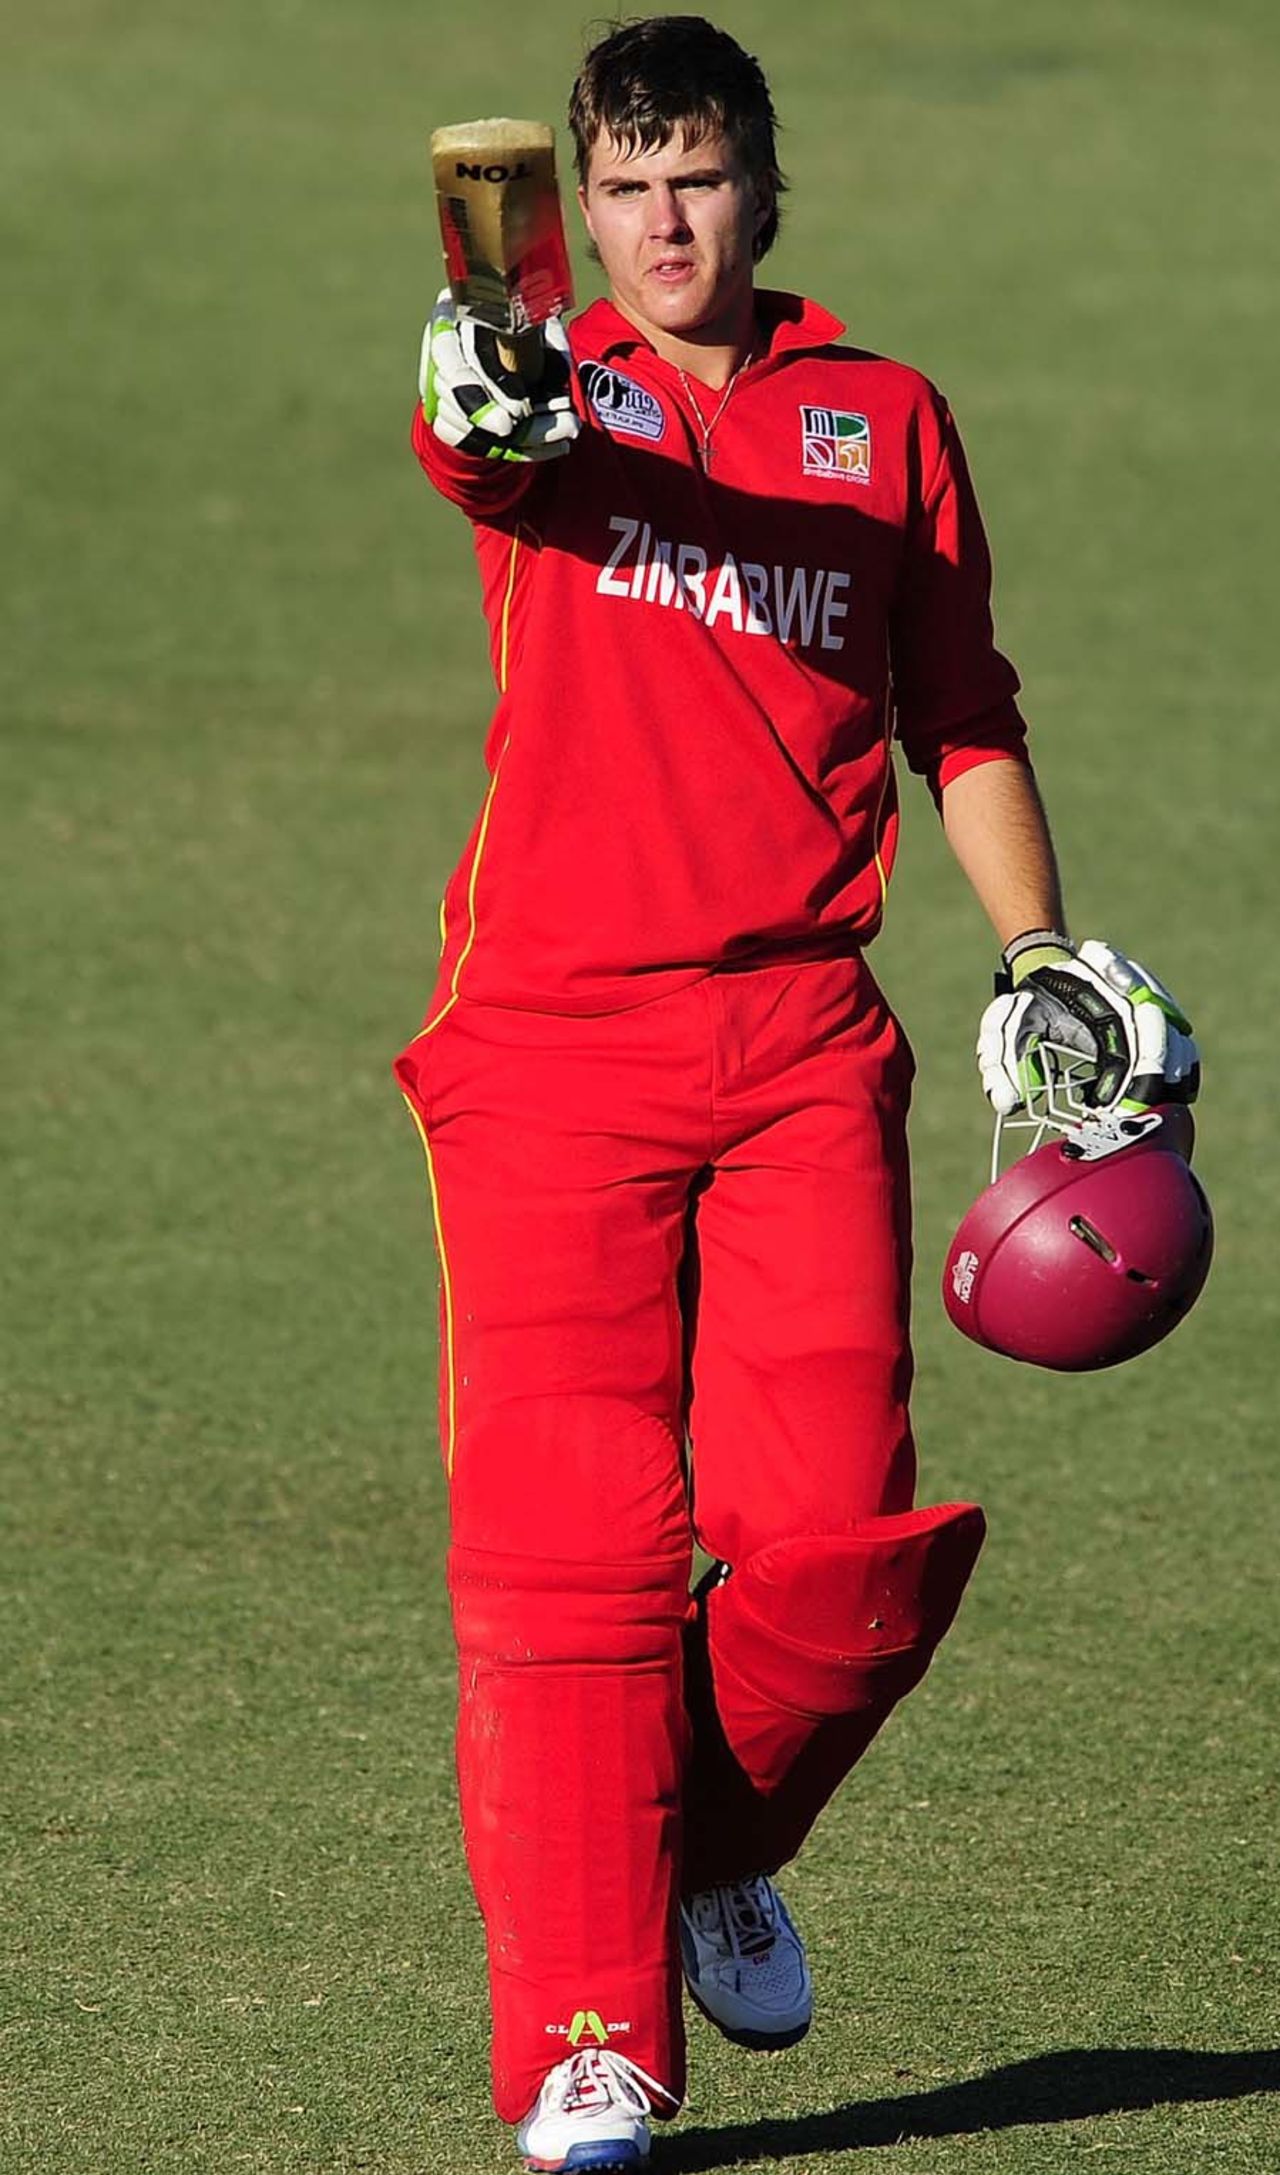 Malcolm Lake scored a century, India v Zimbabwe, Group C, ICC Under-19 World Cup, Townsville, Aug 14, 2012